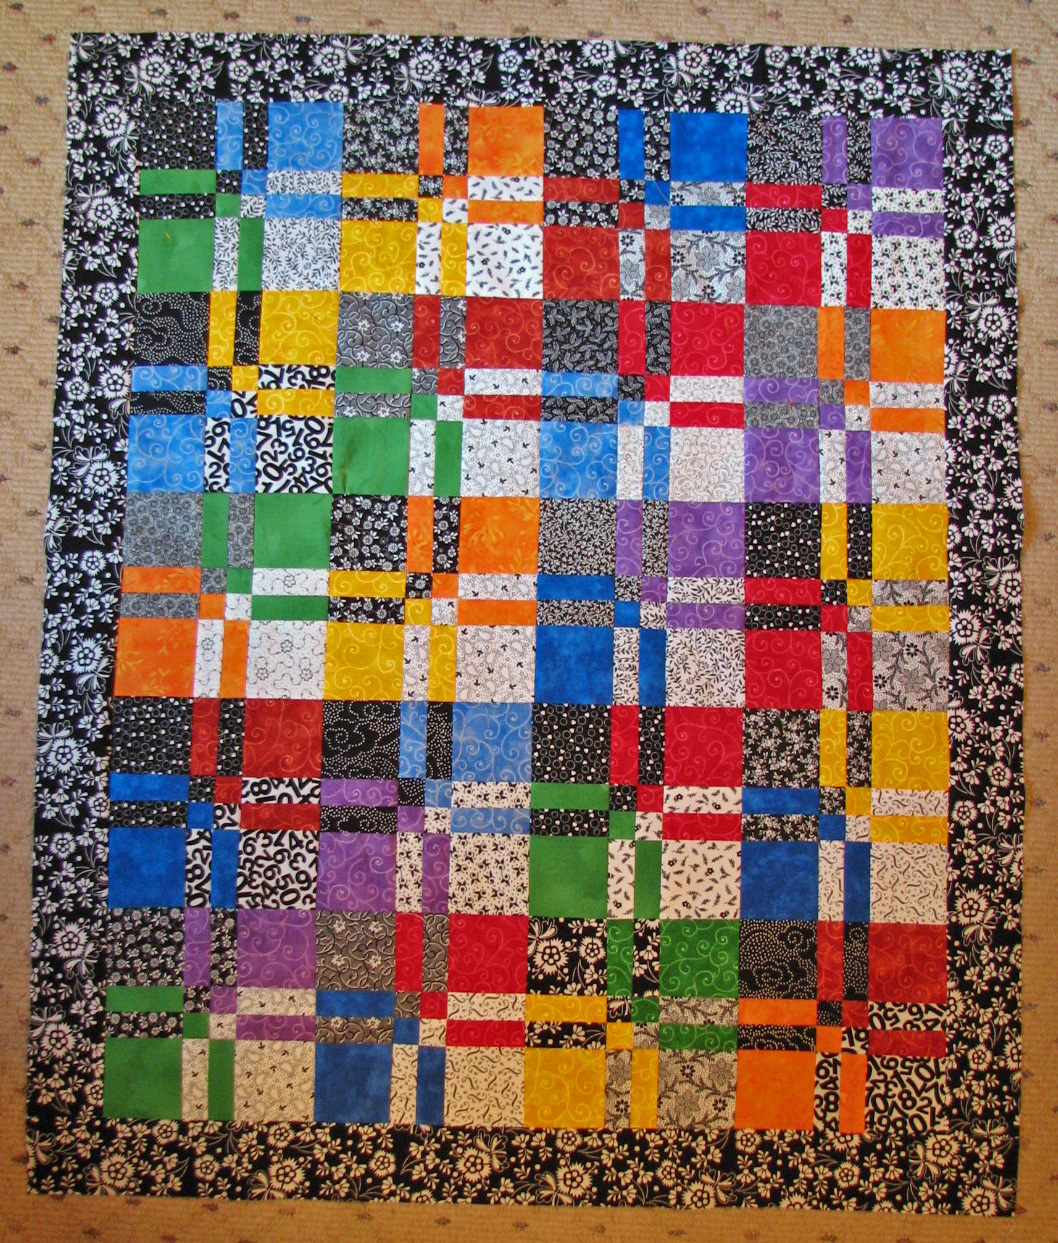 Disappearing 4 patch--I wanted to try it, but with these colors ...